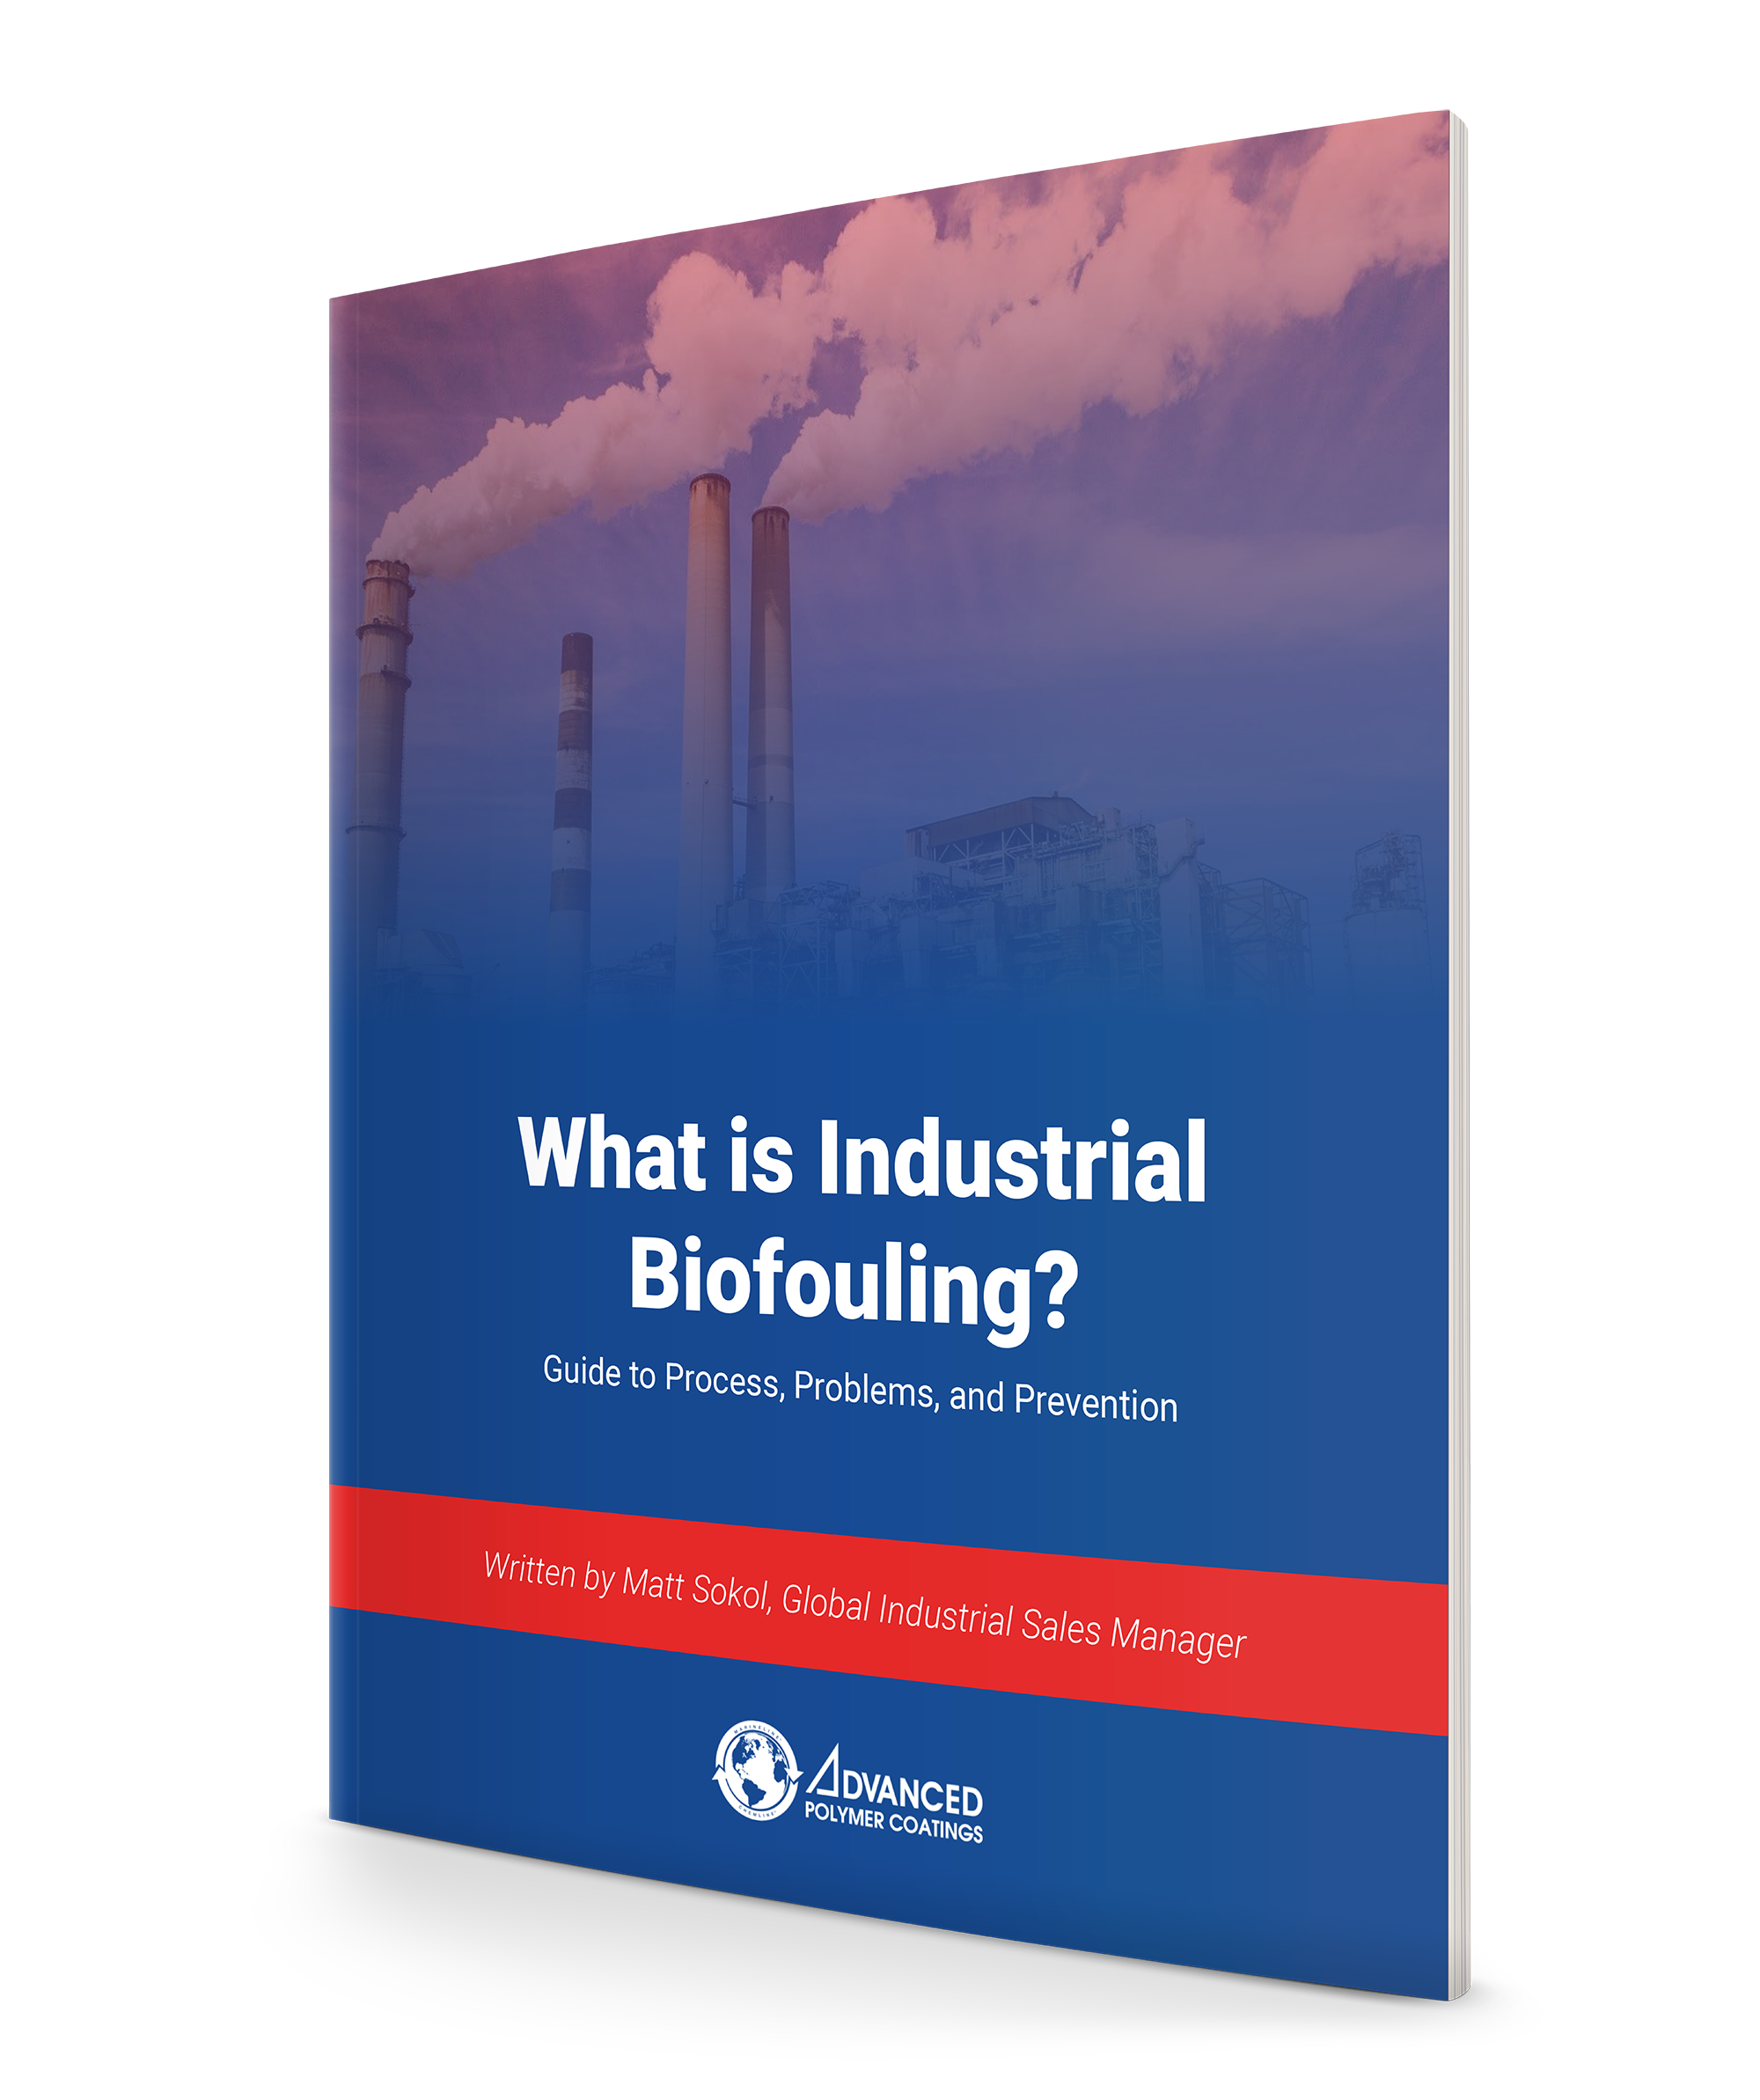 https://f.hubspotusercontent10.net/hubfs/4004065/What%20is%20Industrial%20Biofouling-1.png